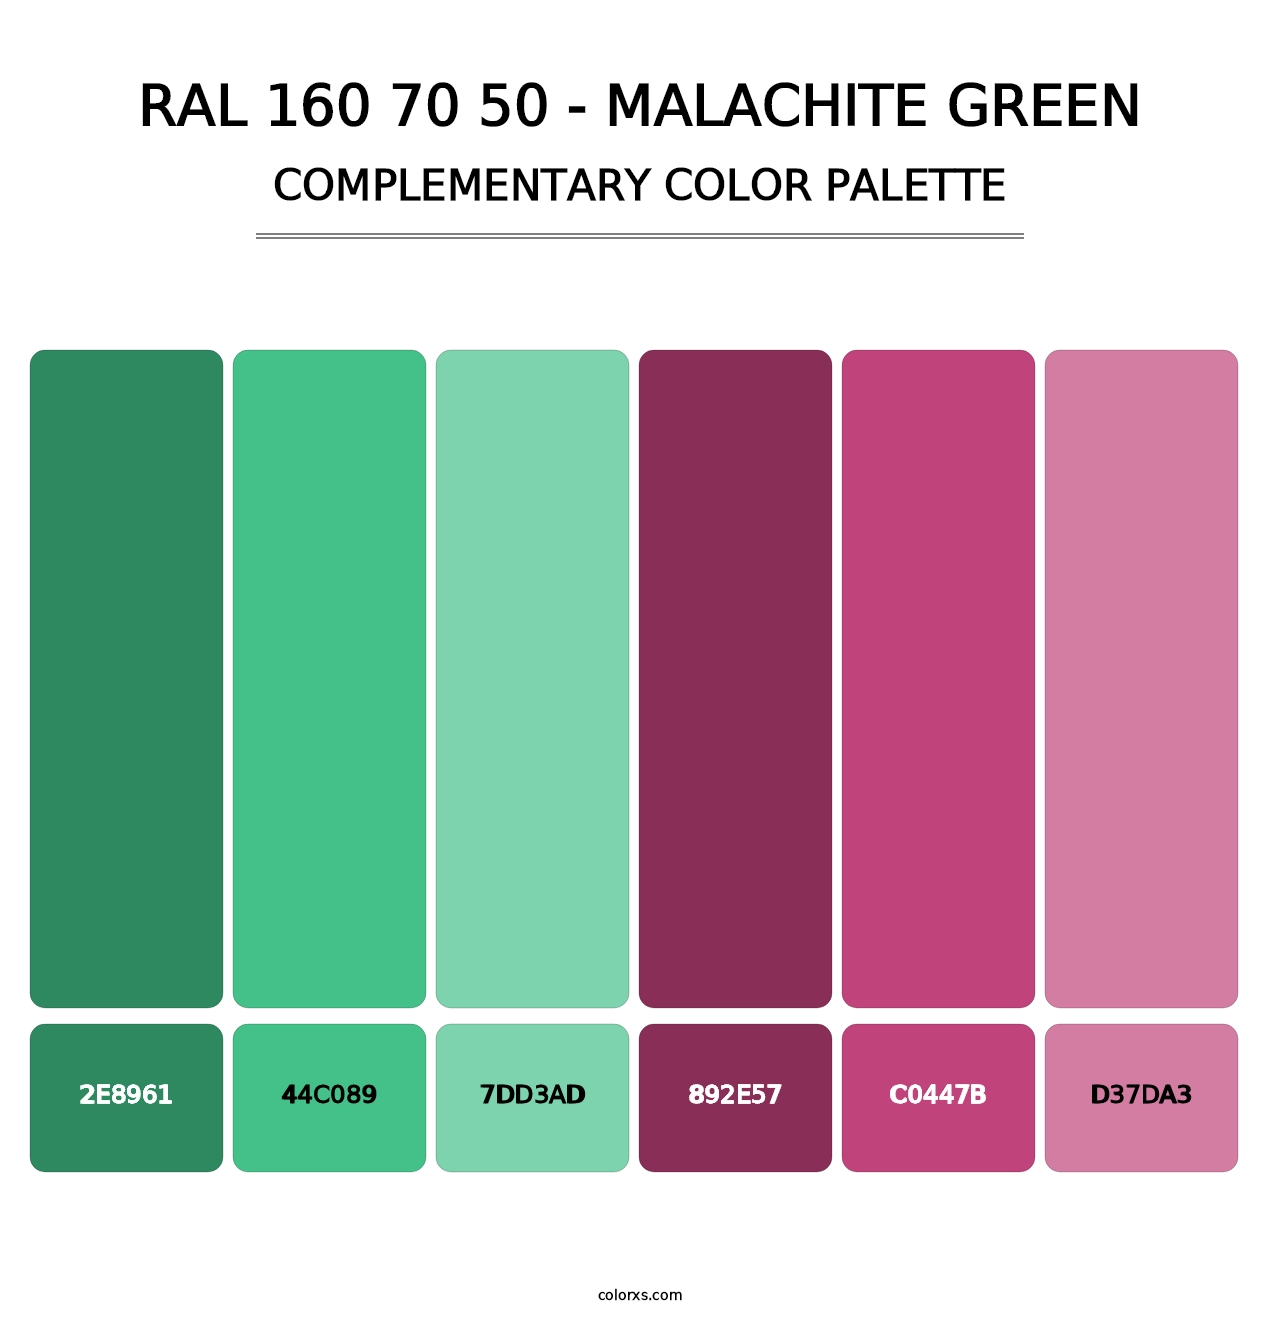 RAL 160 70 50 - Malachite Green - Complementary Color Palette